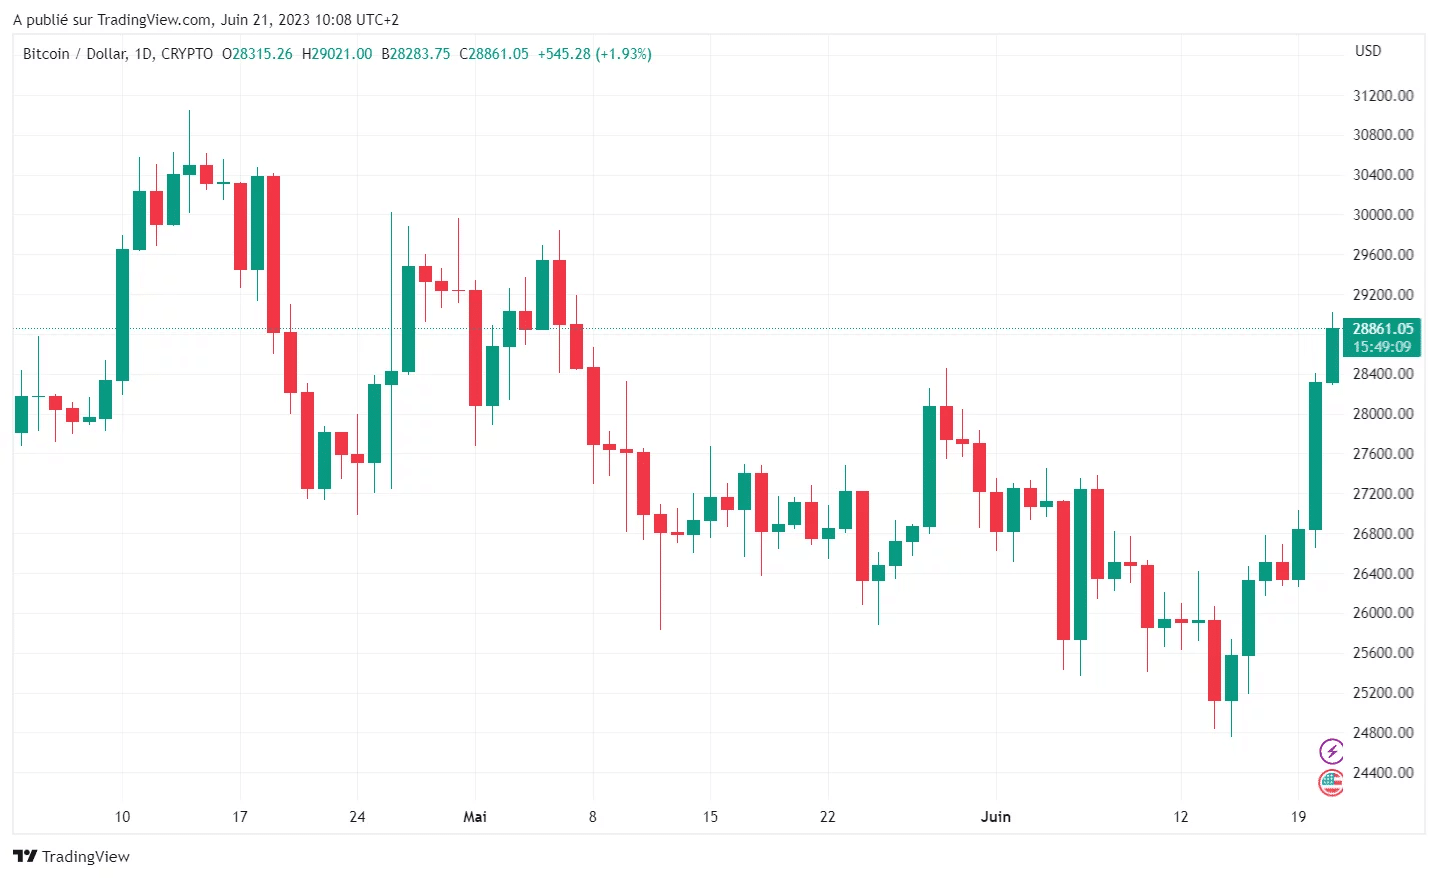 Trading View - Bitcoin (BTC) price between April 2023 to today